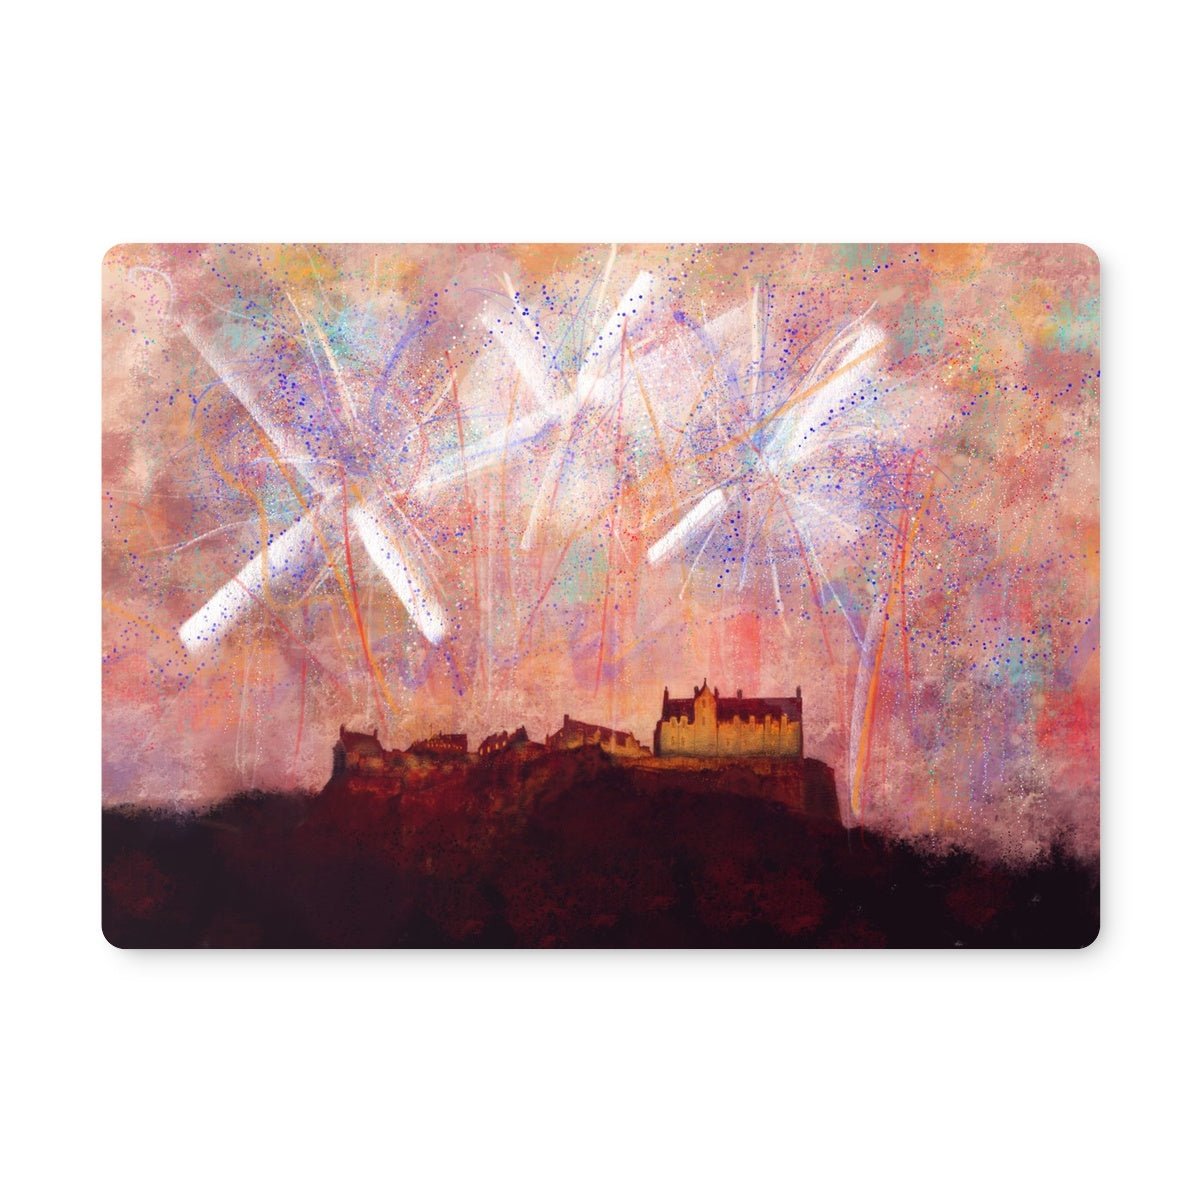 Edinburgh Castle Fireworks Art Gifts Placemat-Placemats-Edinburgh & Glasgow Art Gallery-4 Placemats-Paintings, Prints, Homeware, Art Gifts From Scotland By Scottish Artist Kevin Hunter